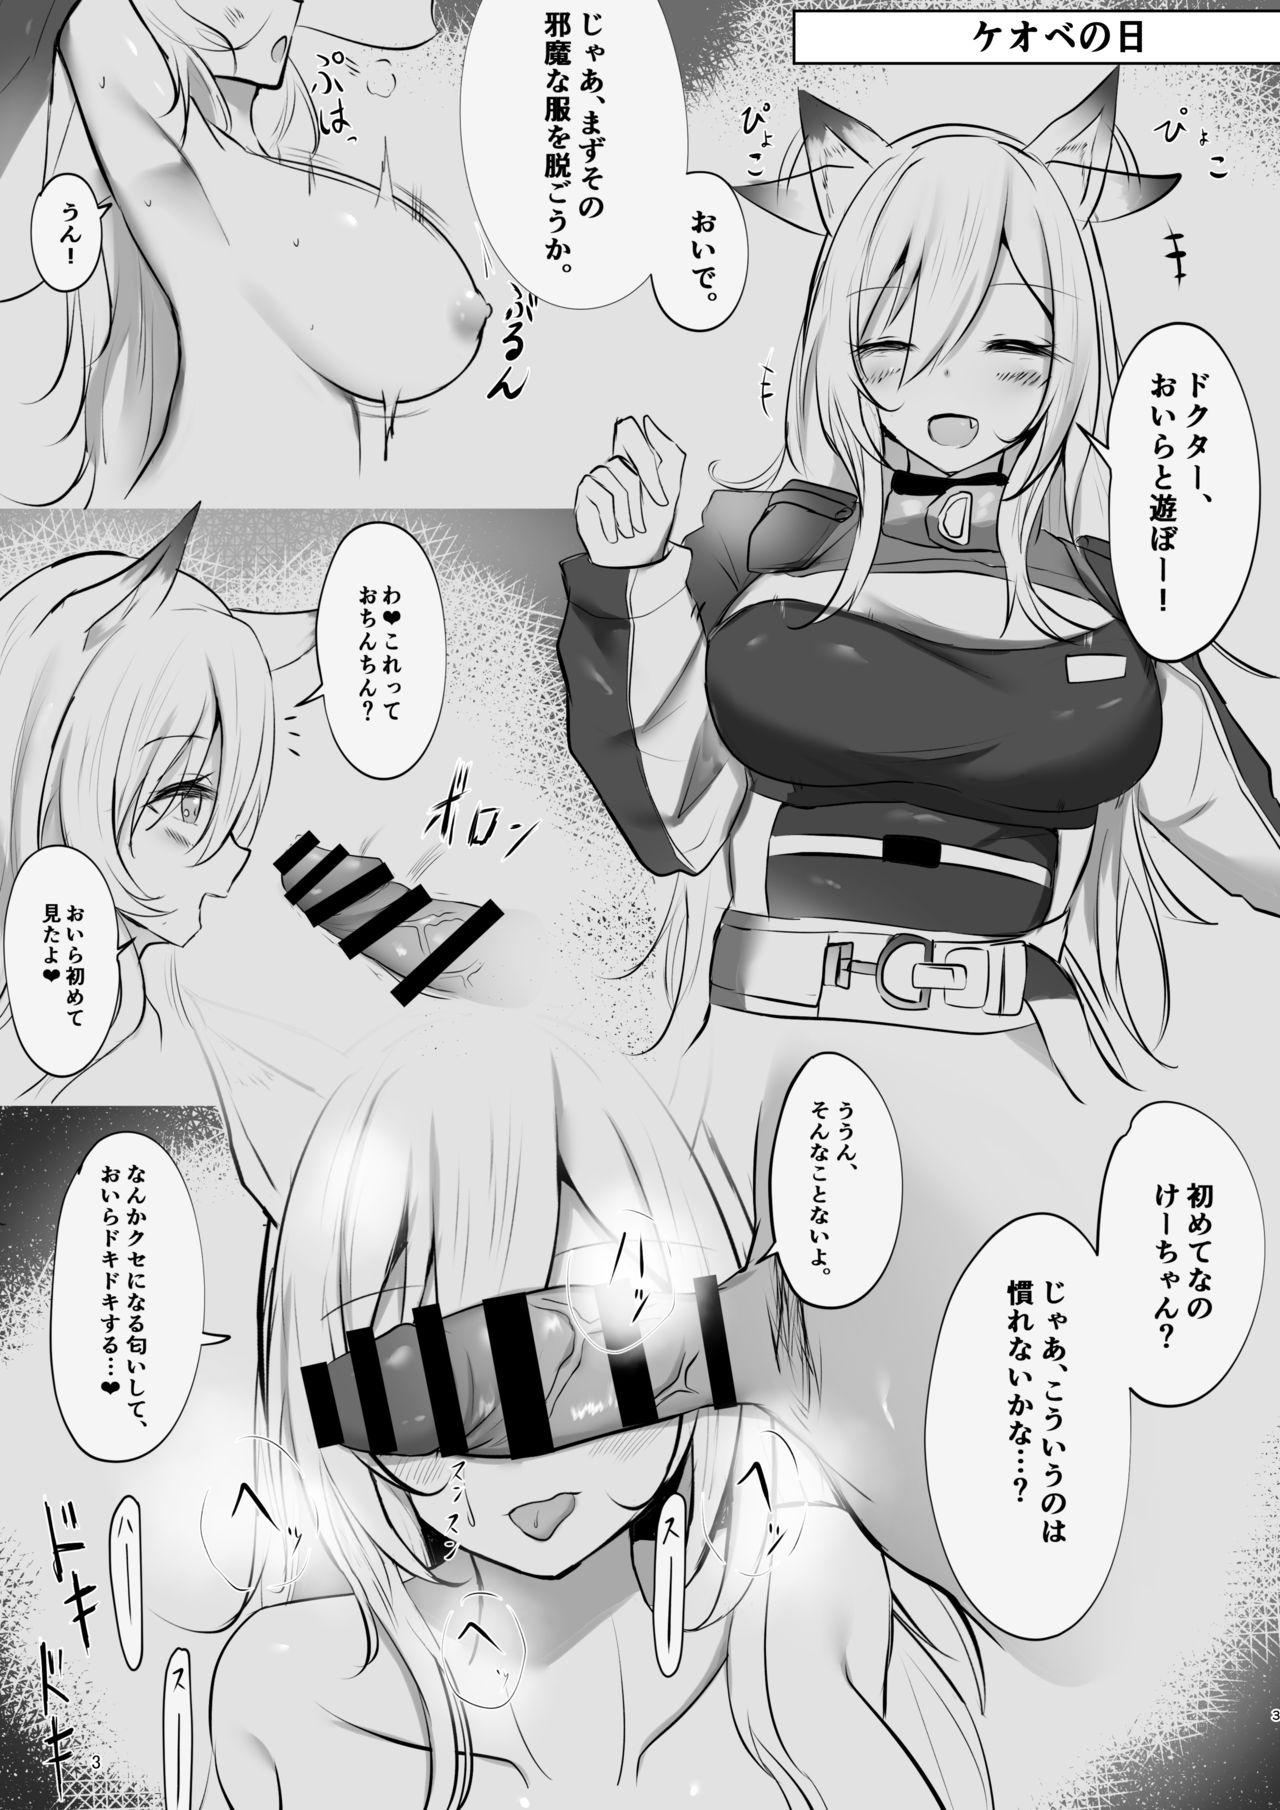 Amateur Porn Free 夜な夜な扇情作戦記録 - Arknights Cowgirl - Page 3